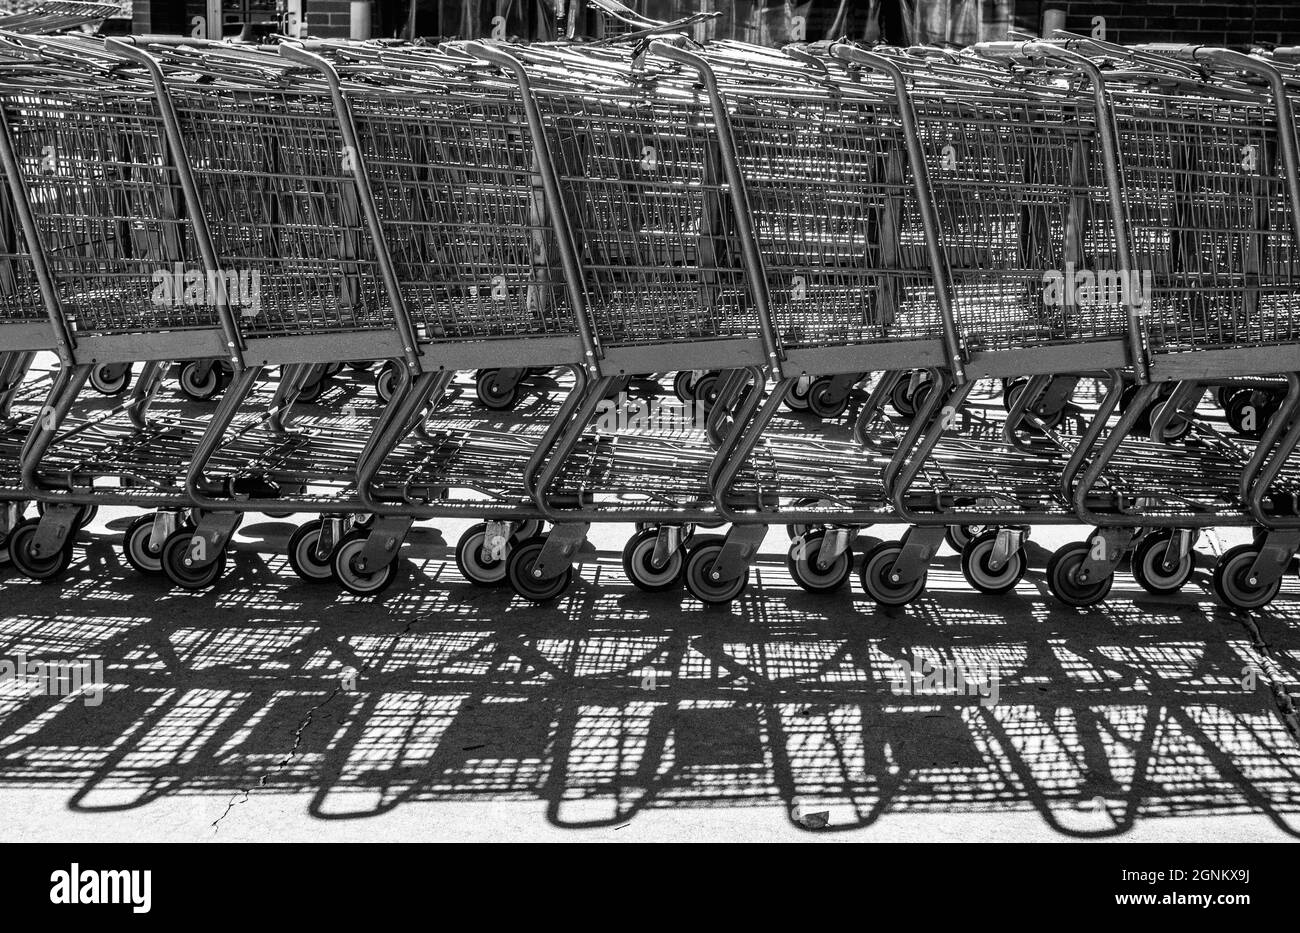 Shopping carts pushed together make an abstract design Stock Photo